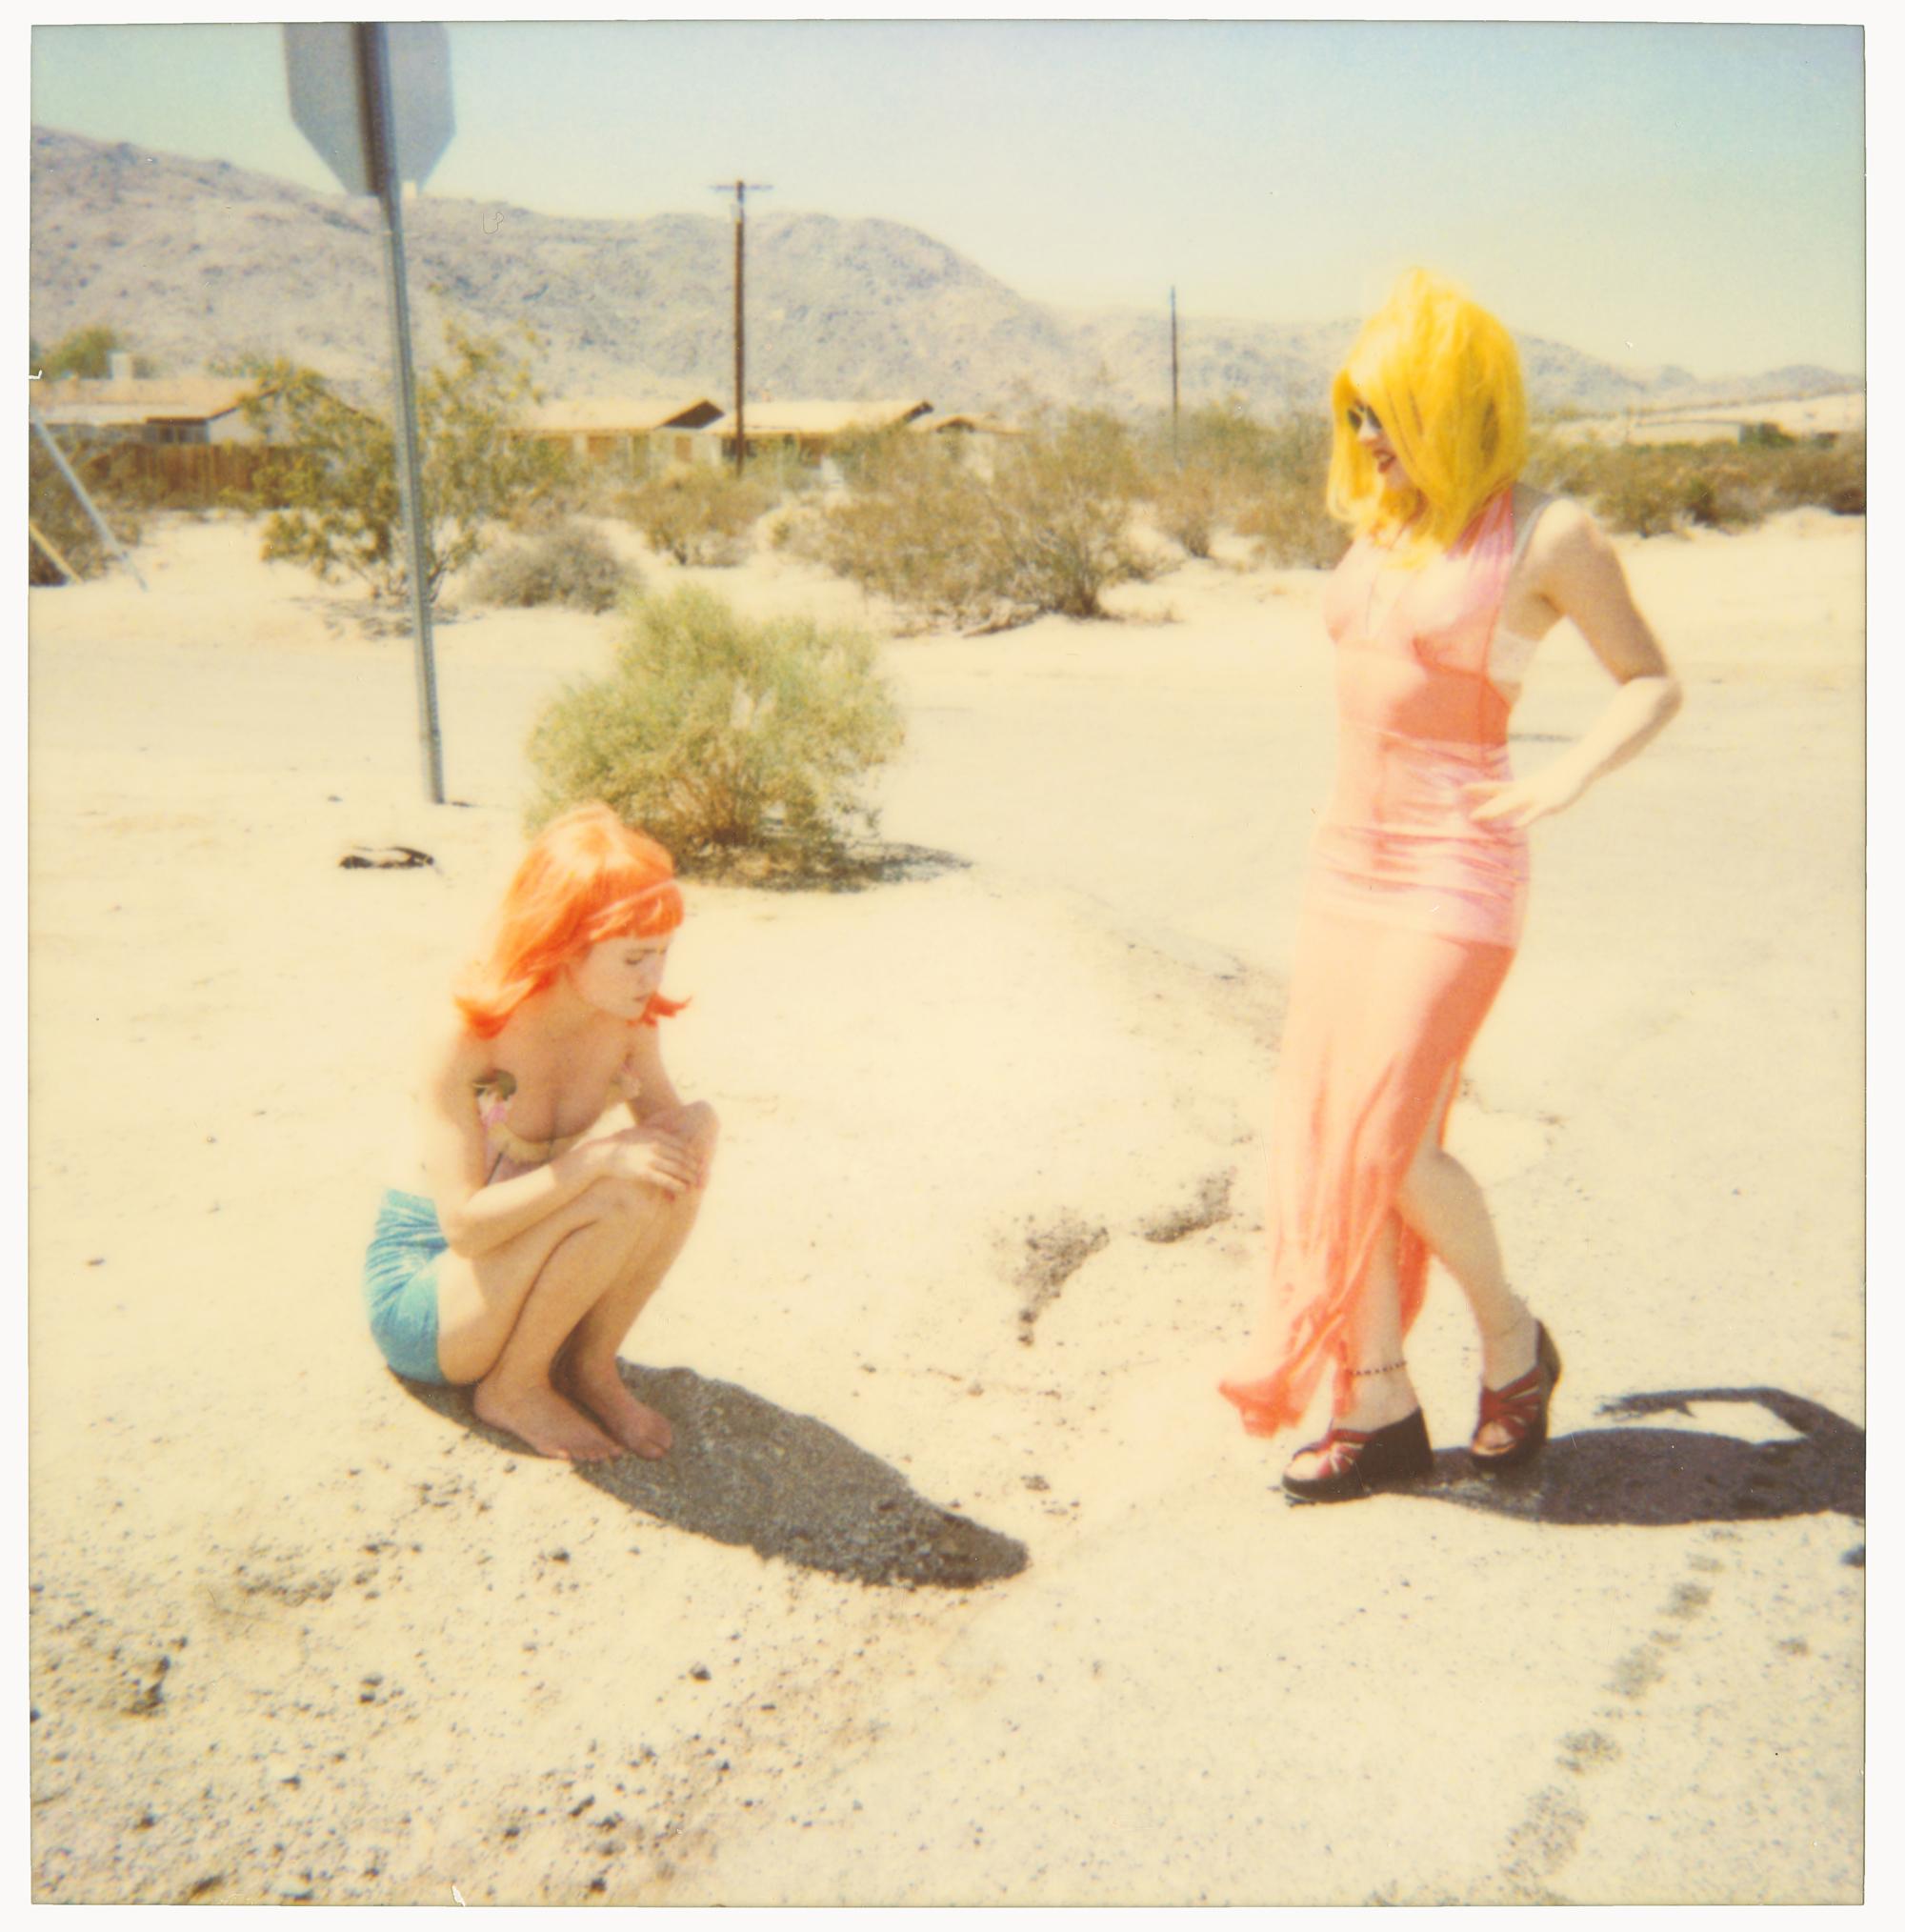 Radha and Max on Dirt Road (29 Palms, CA) - analog, Polaroid, Contemporary - Photograph by Stefanie Schneider